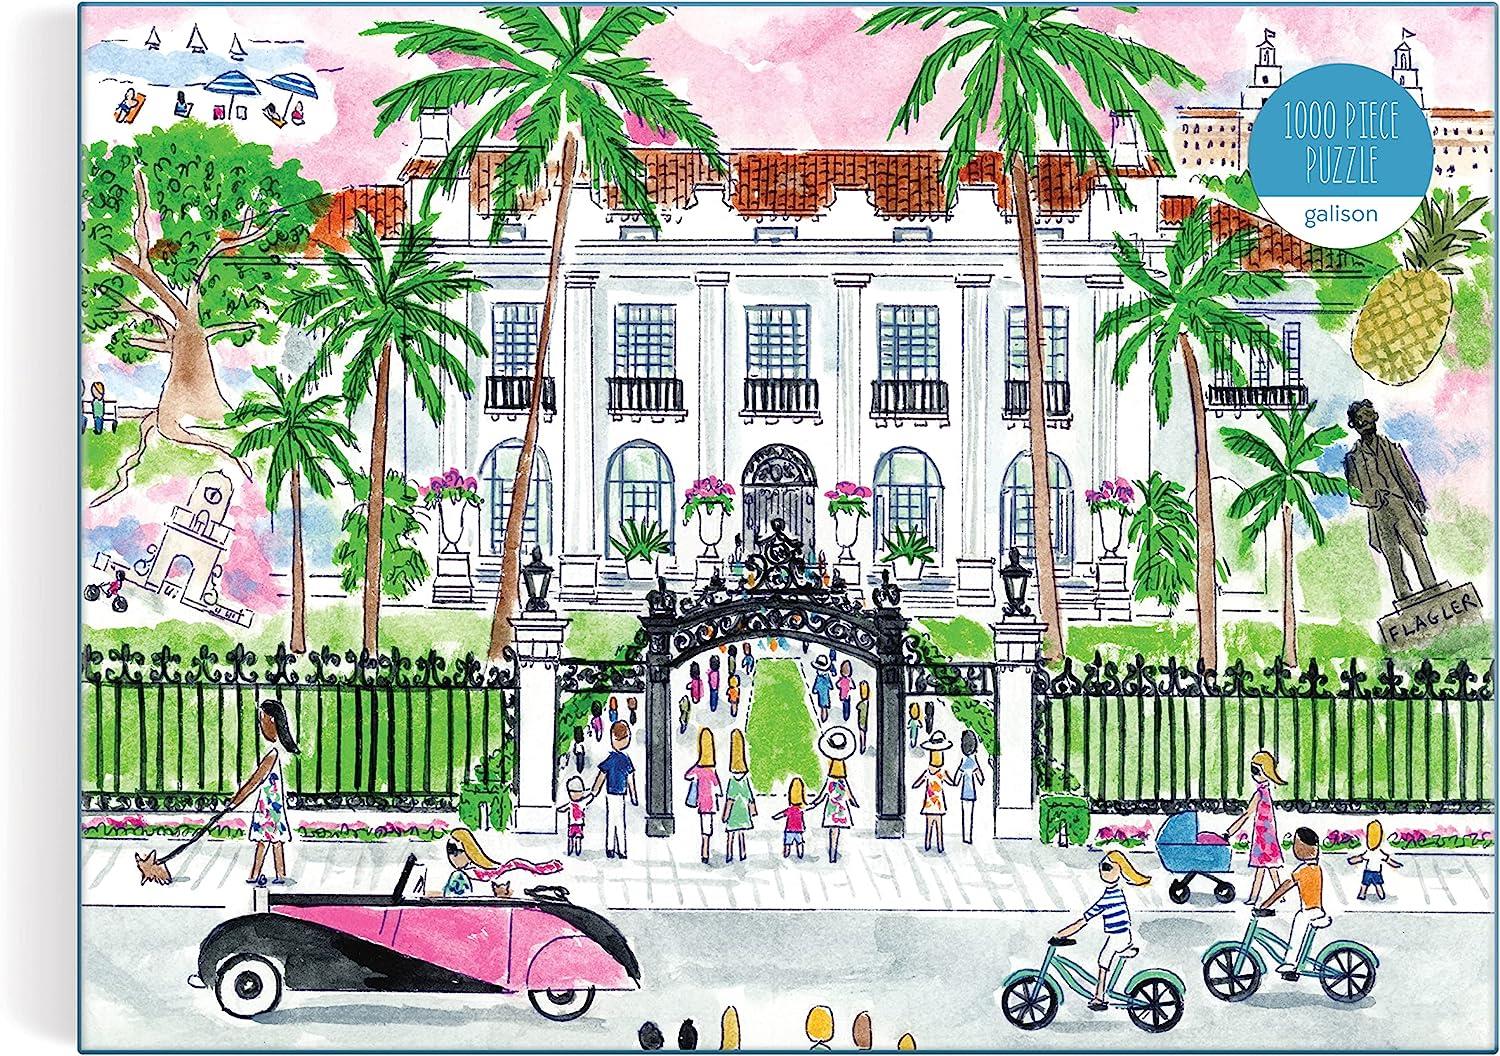 Galison A Sunny Day in Palm Beach, Michael Storrings Jigsaw Puzzle (1000 Pieces)